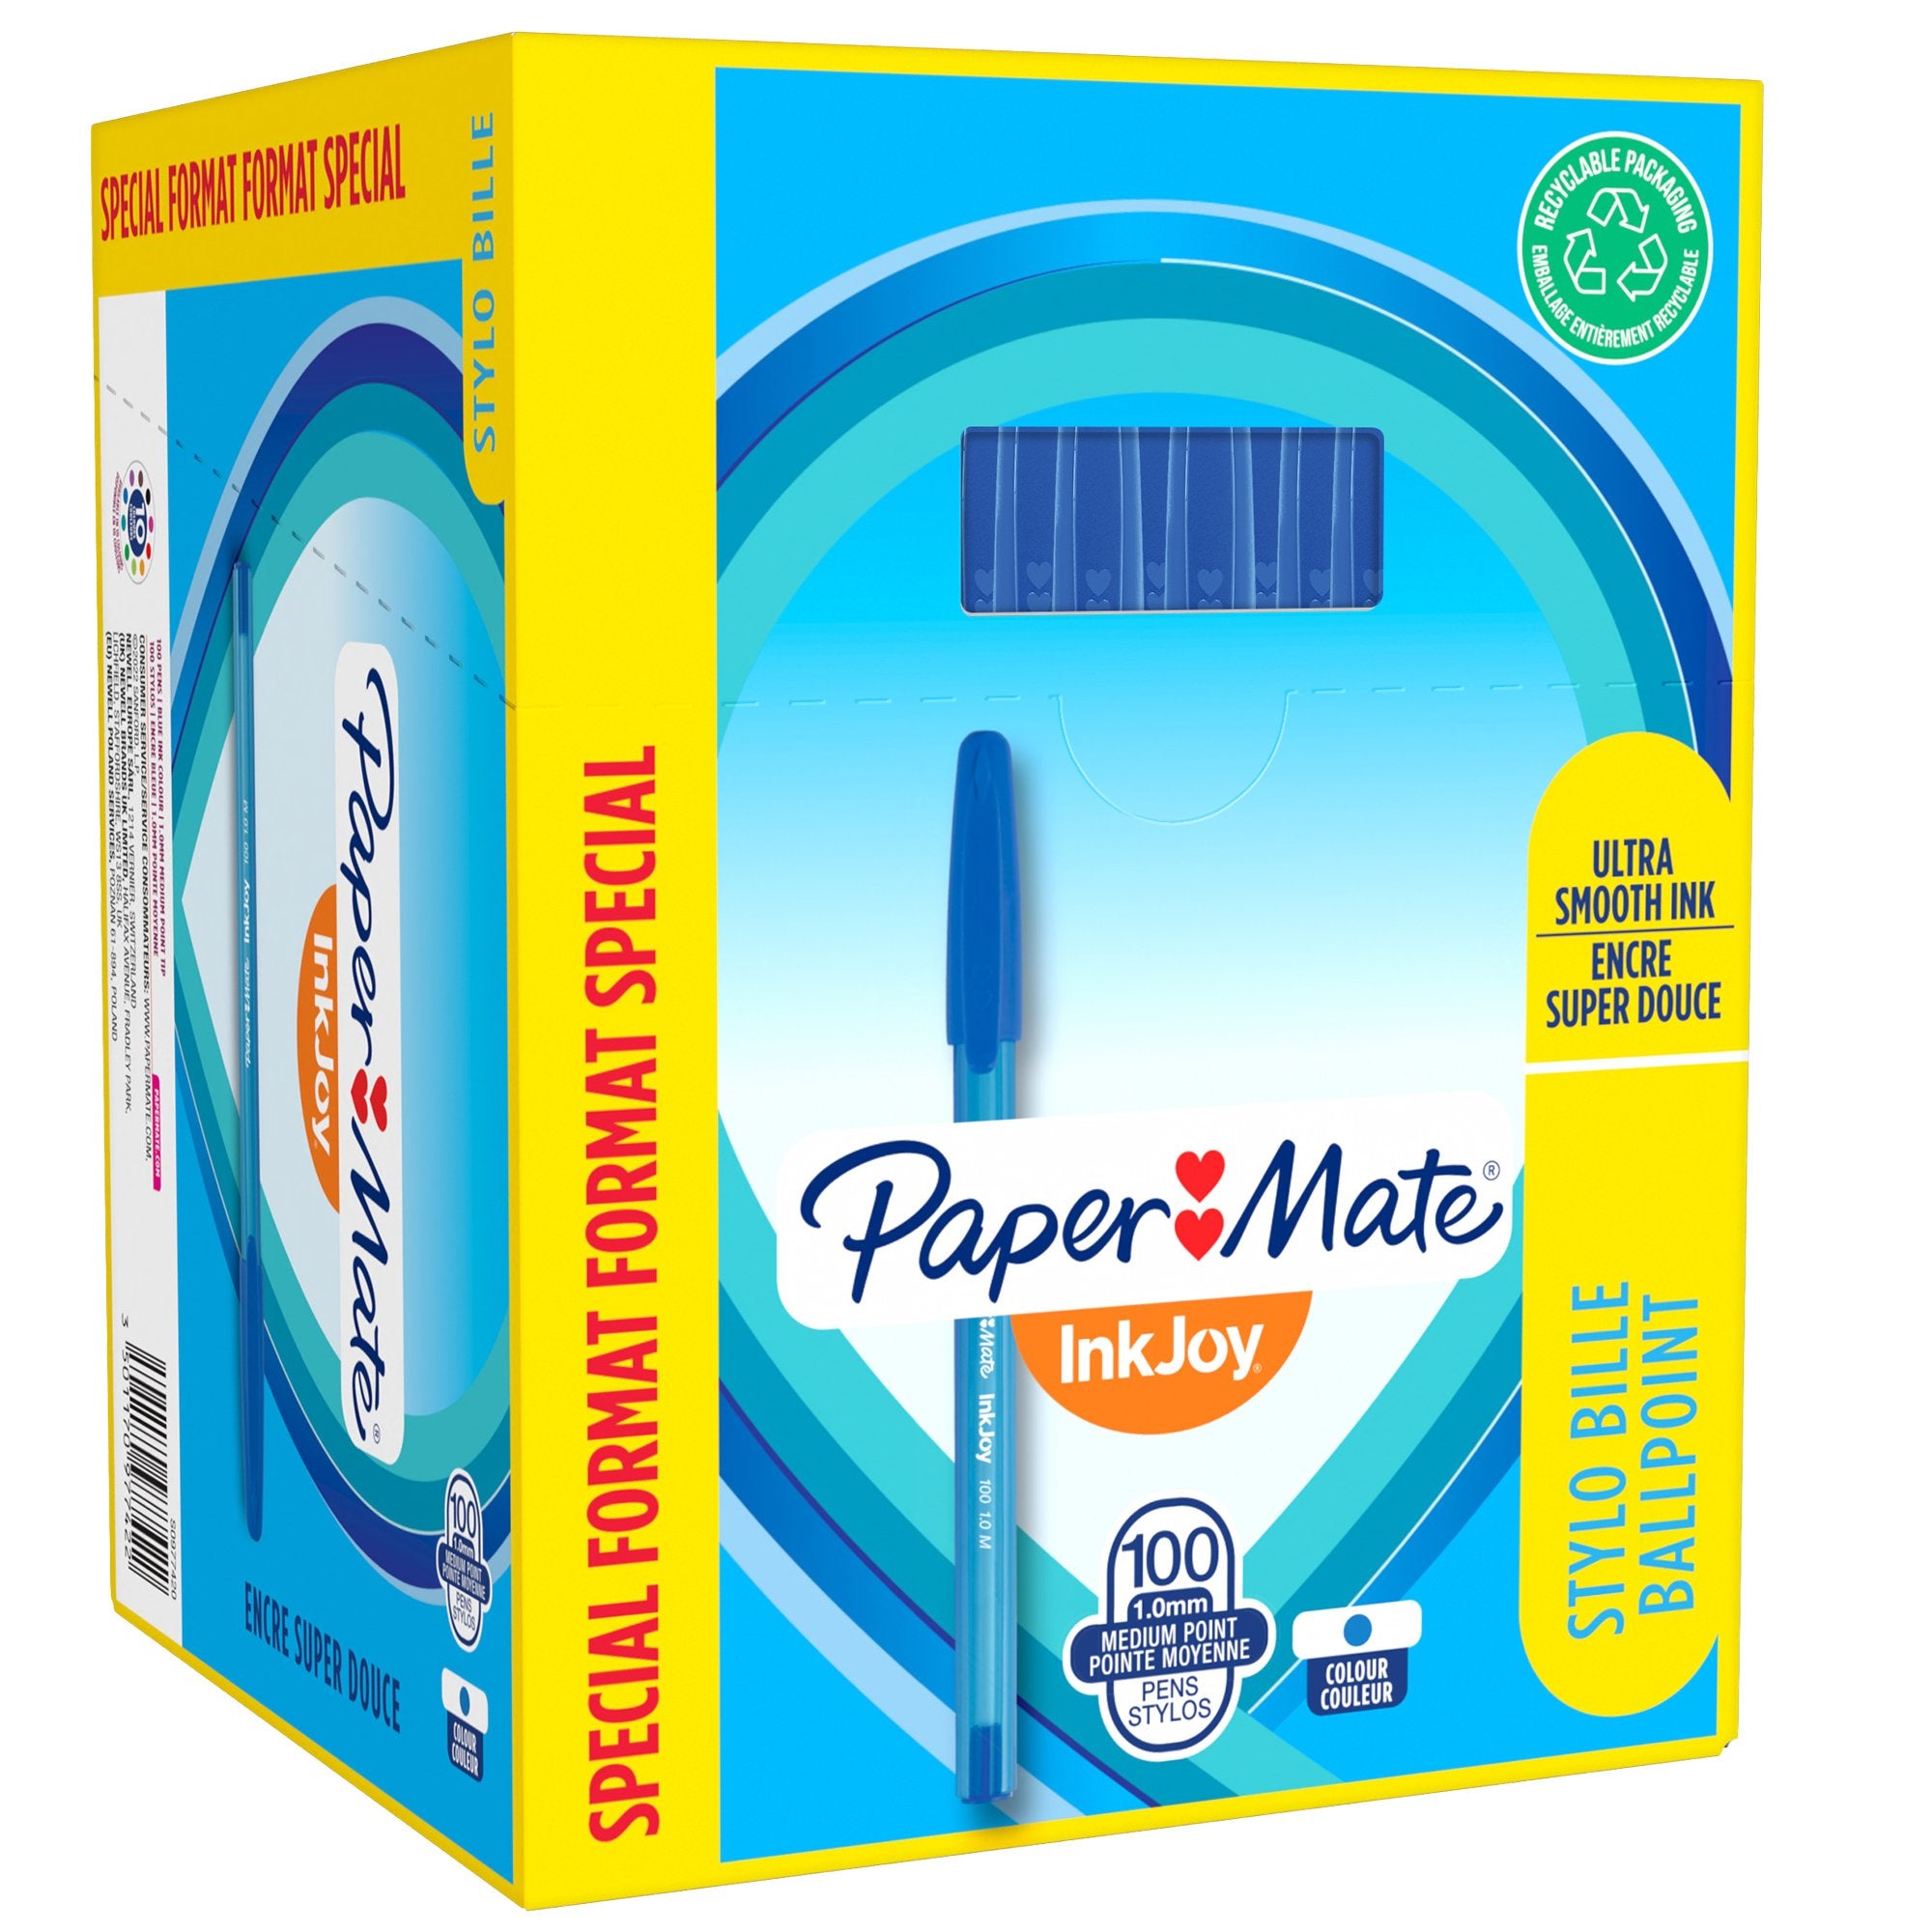 papermate-special-pack-8020penna-sfera-inkjoy-100-blu-1-0mm